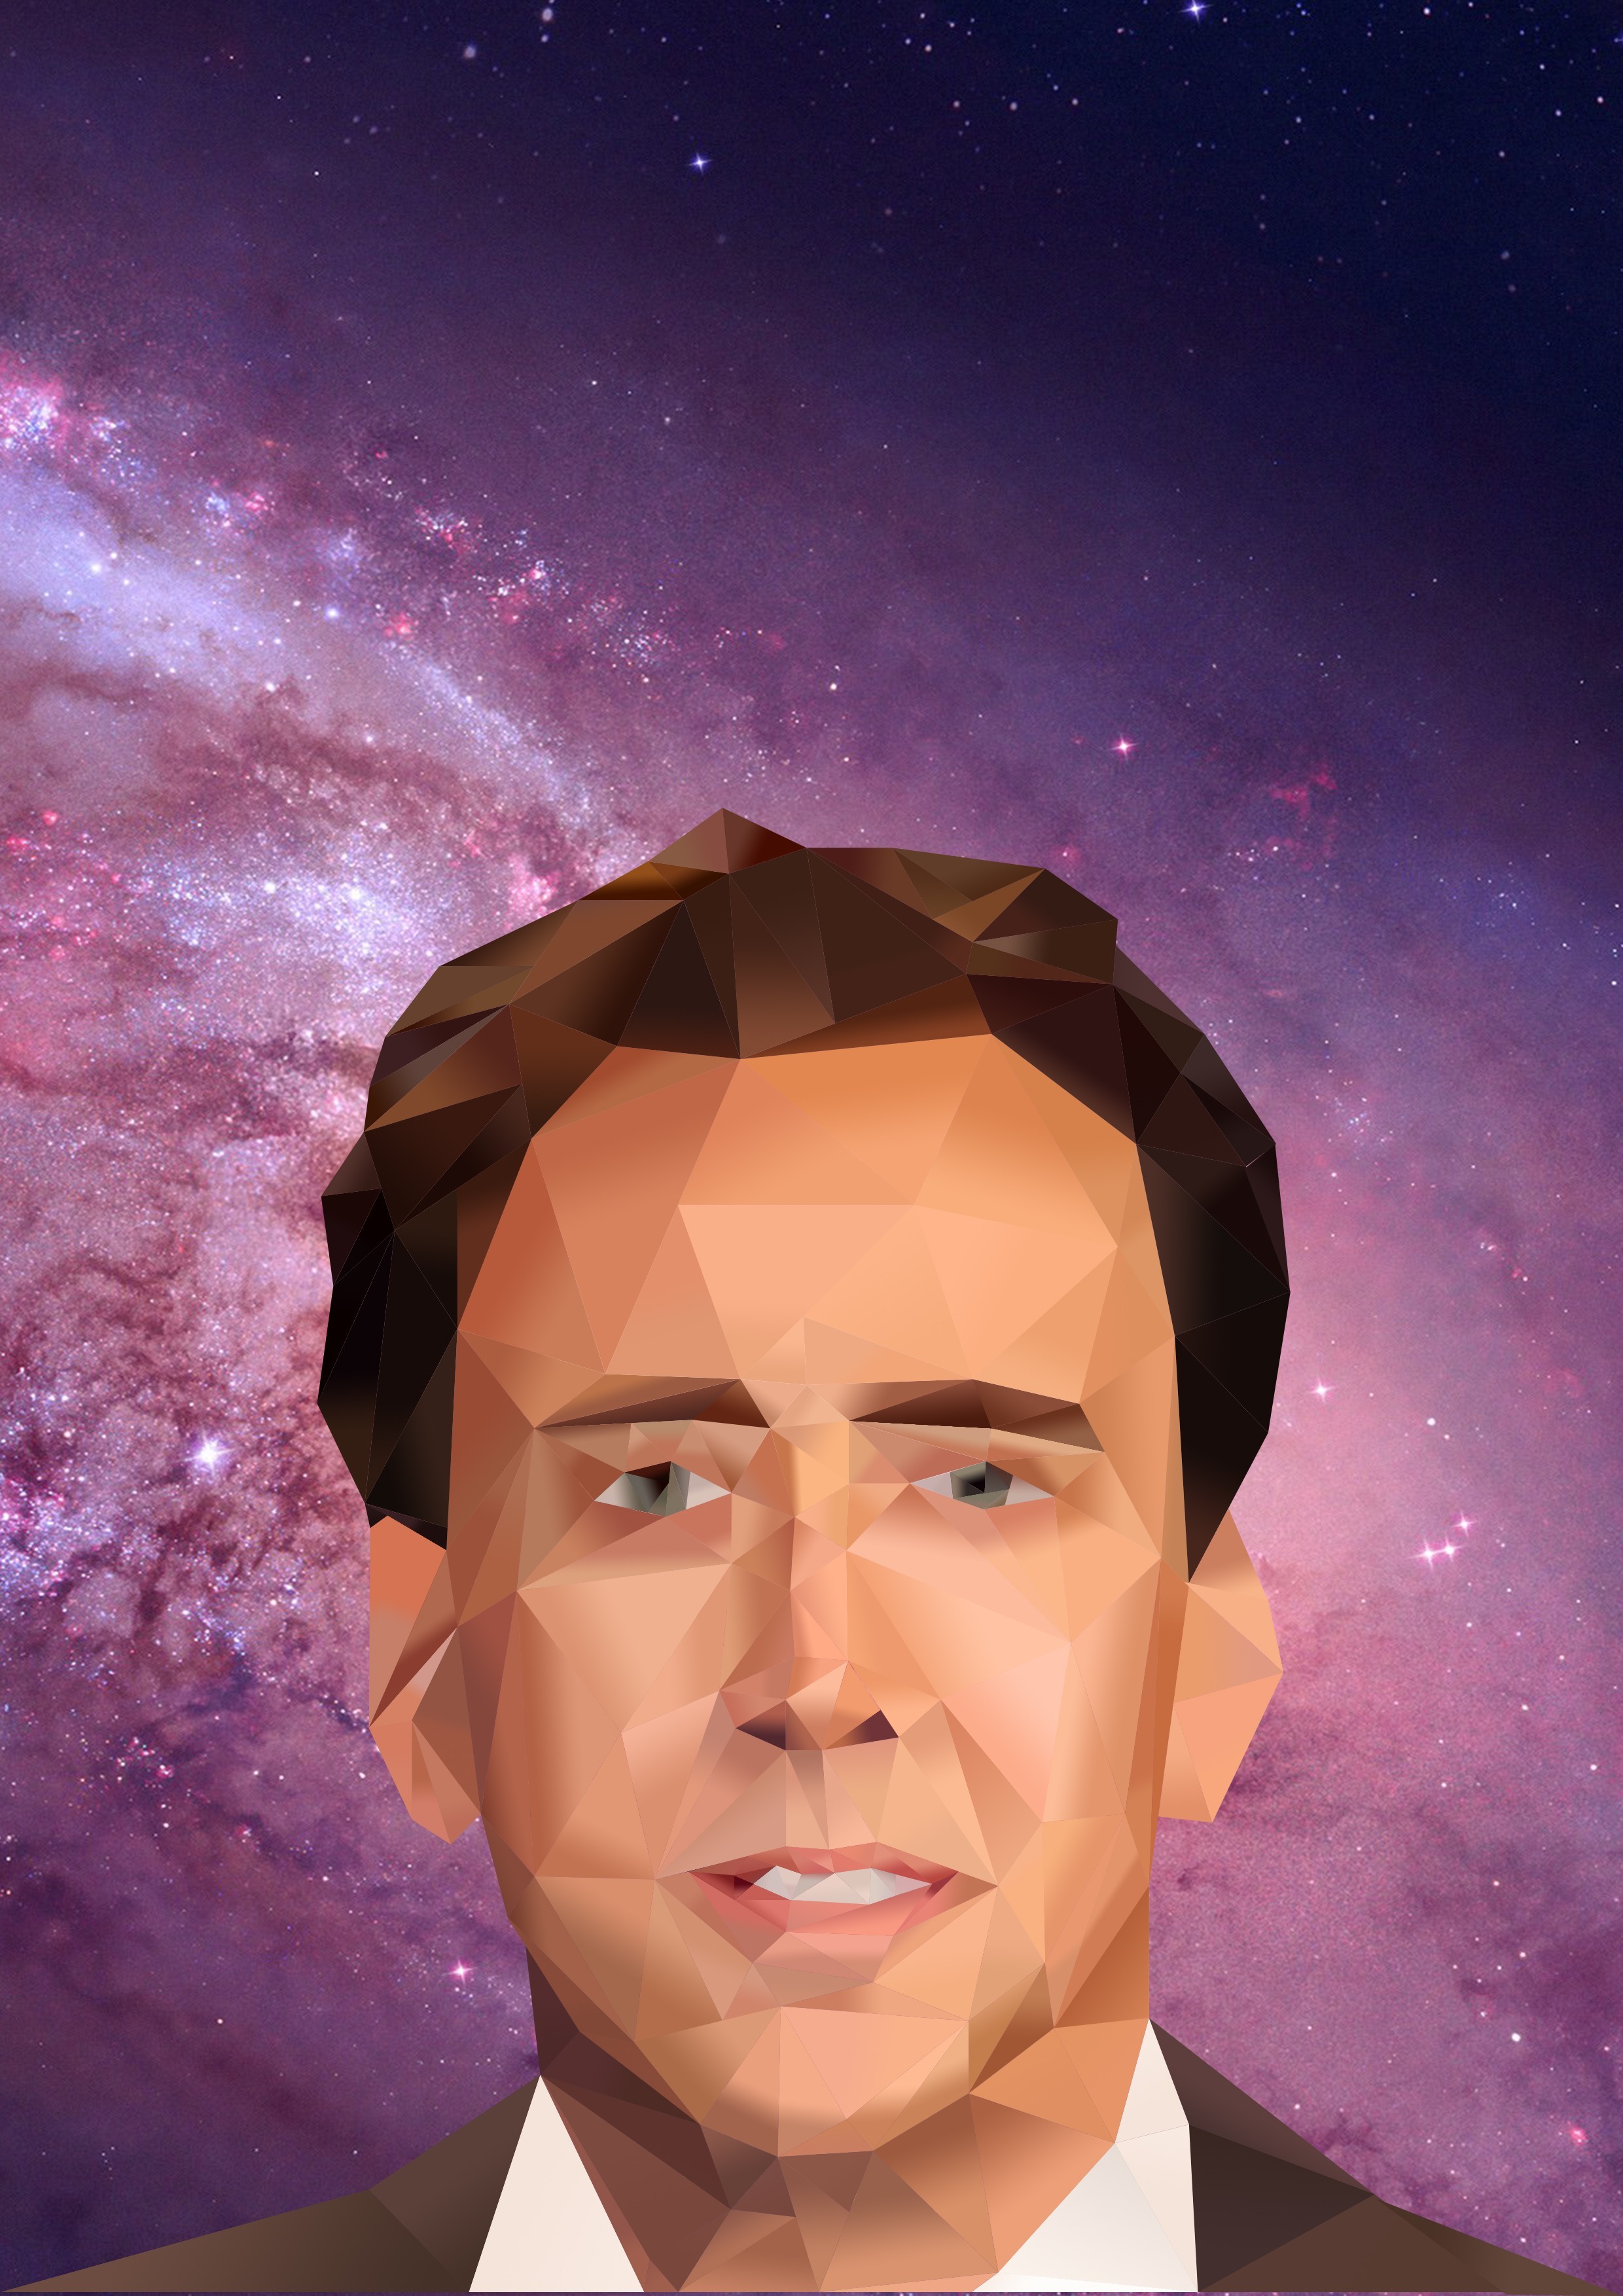 Nicolas Cage, Space, Photoshopped, Adobe Photoshop, Face, Triangle Wallpaper